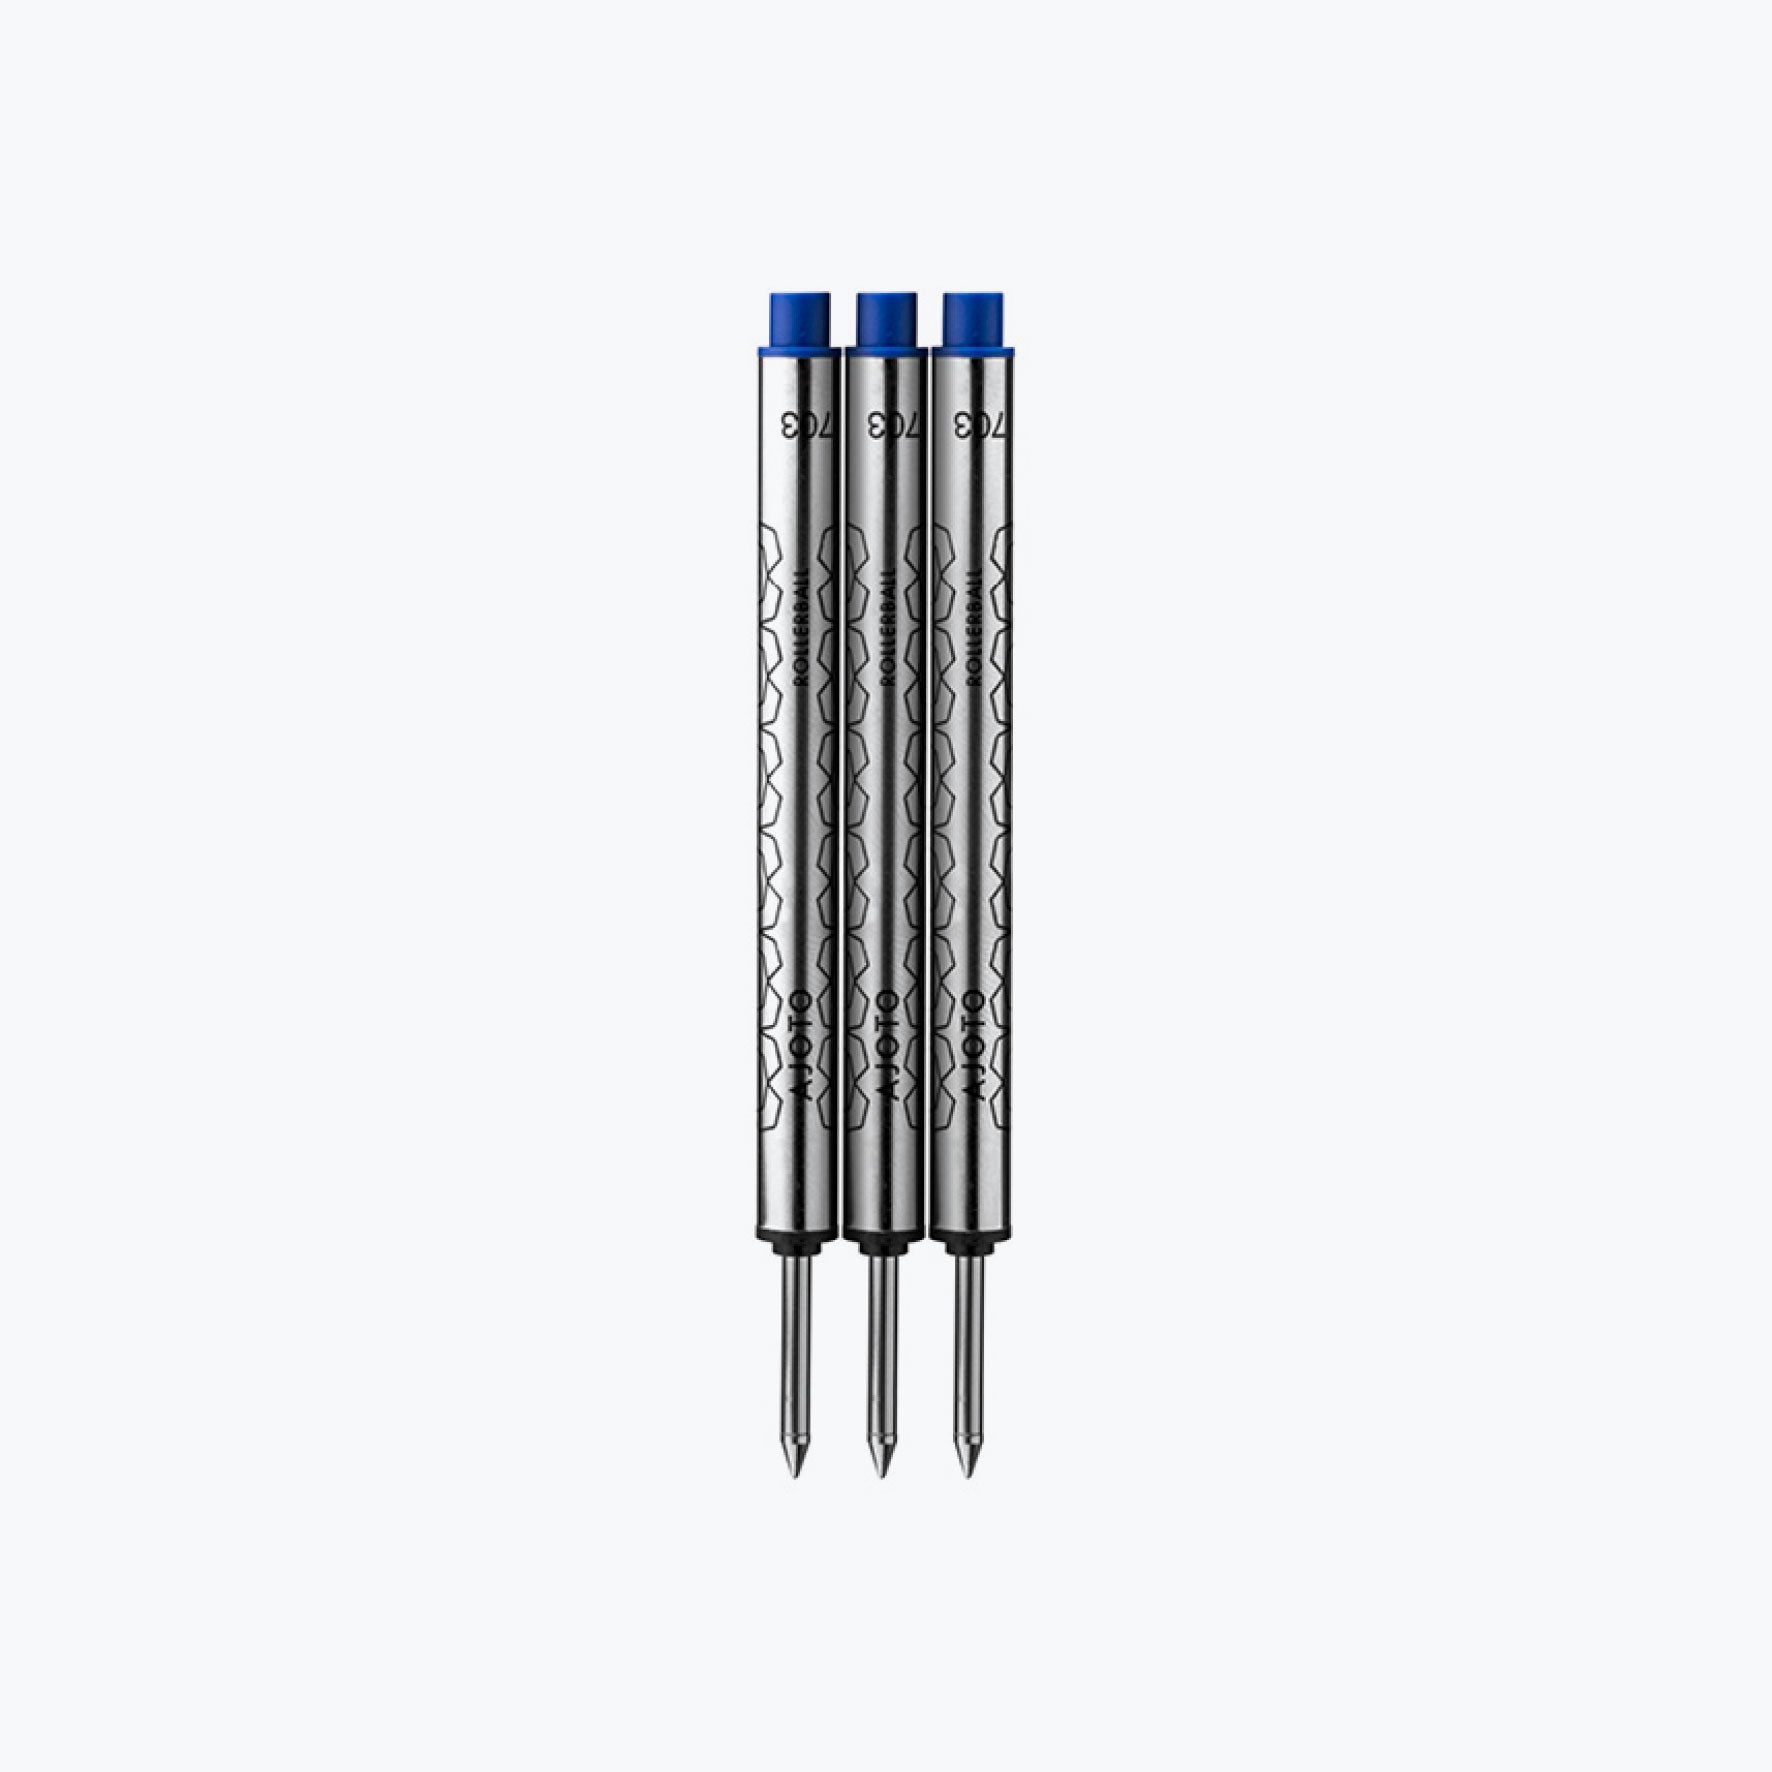 Ajoto - Rollerball Refills - Blue - Pack of 3